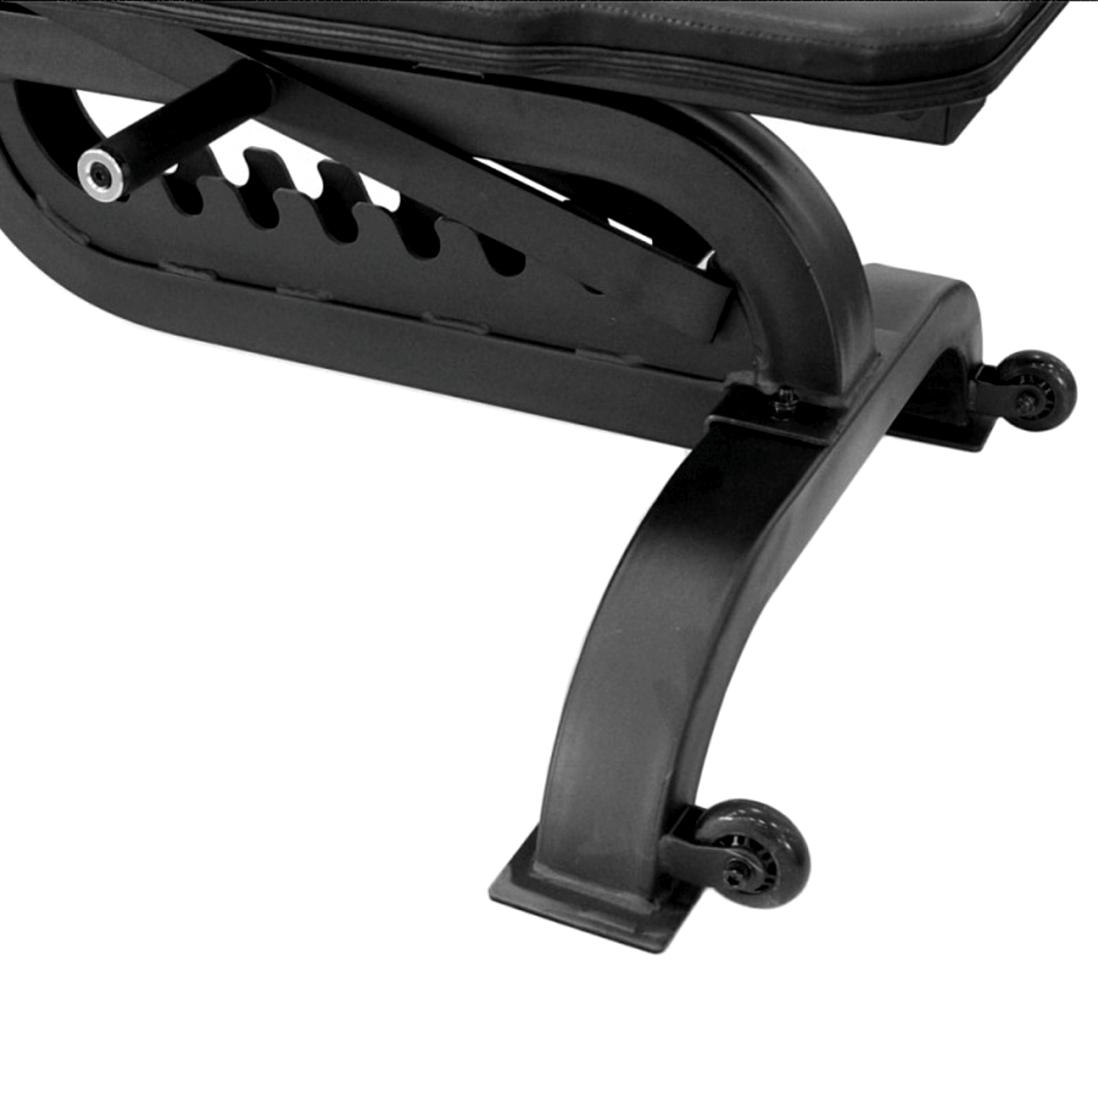 Gympak Commercial Adjustable Flat to Incline Bench Incline Adjustment